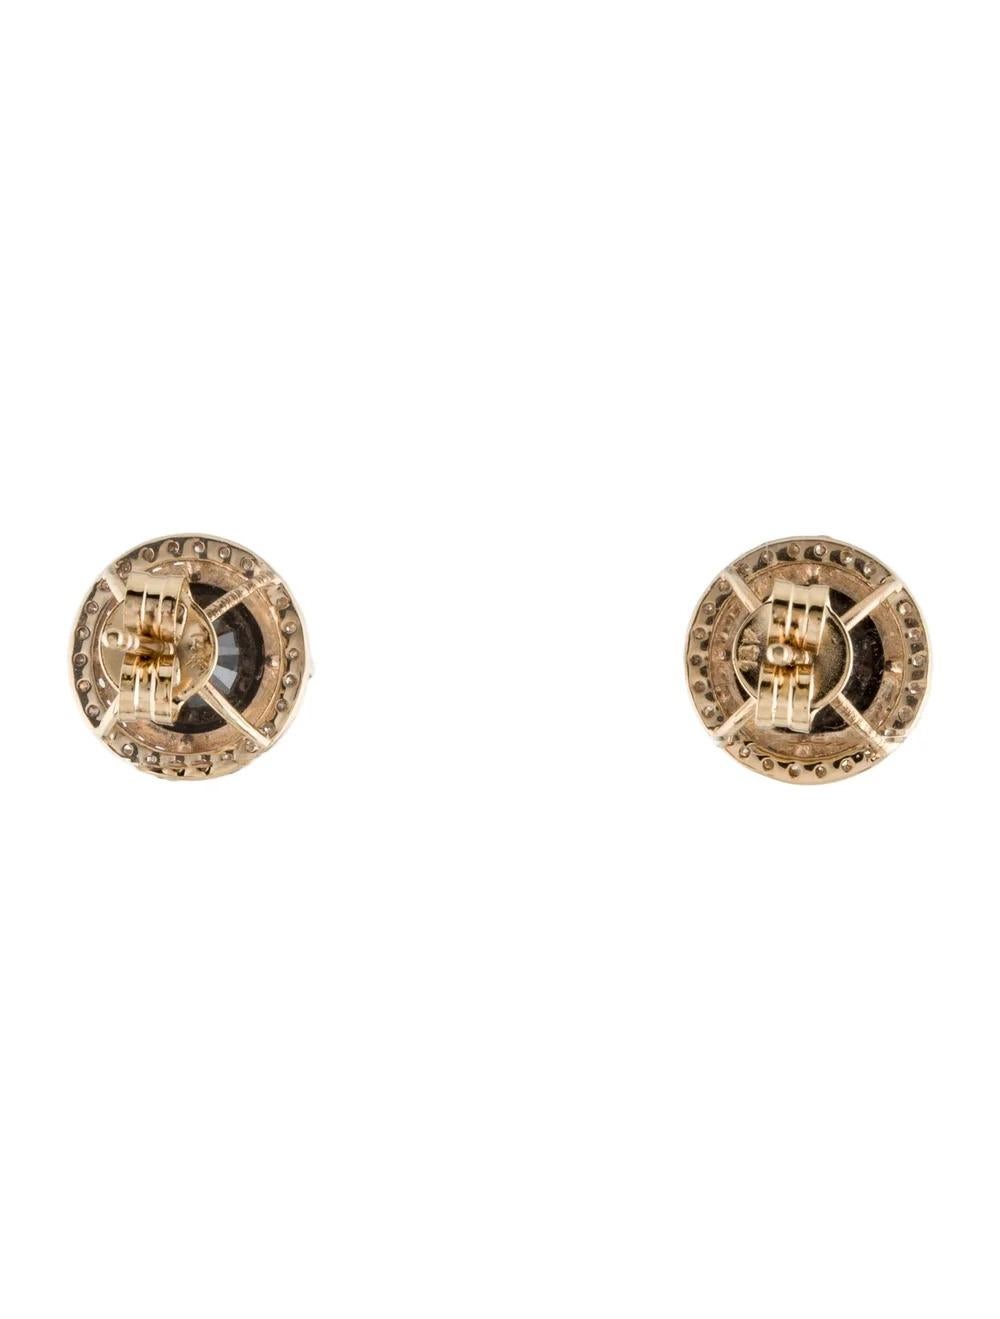 14K Diamond Halo Stud Earrings - Fine Jewelry, Stunning Jewelry Piece, Elegant In New Condition For Sale In Holtsville, NY